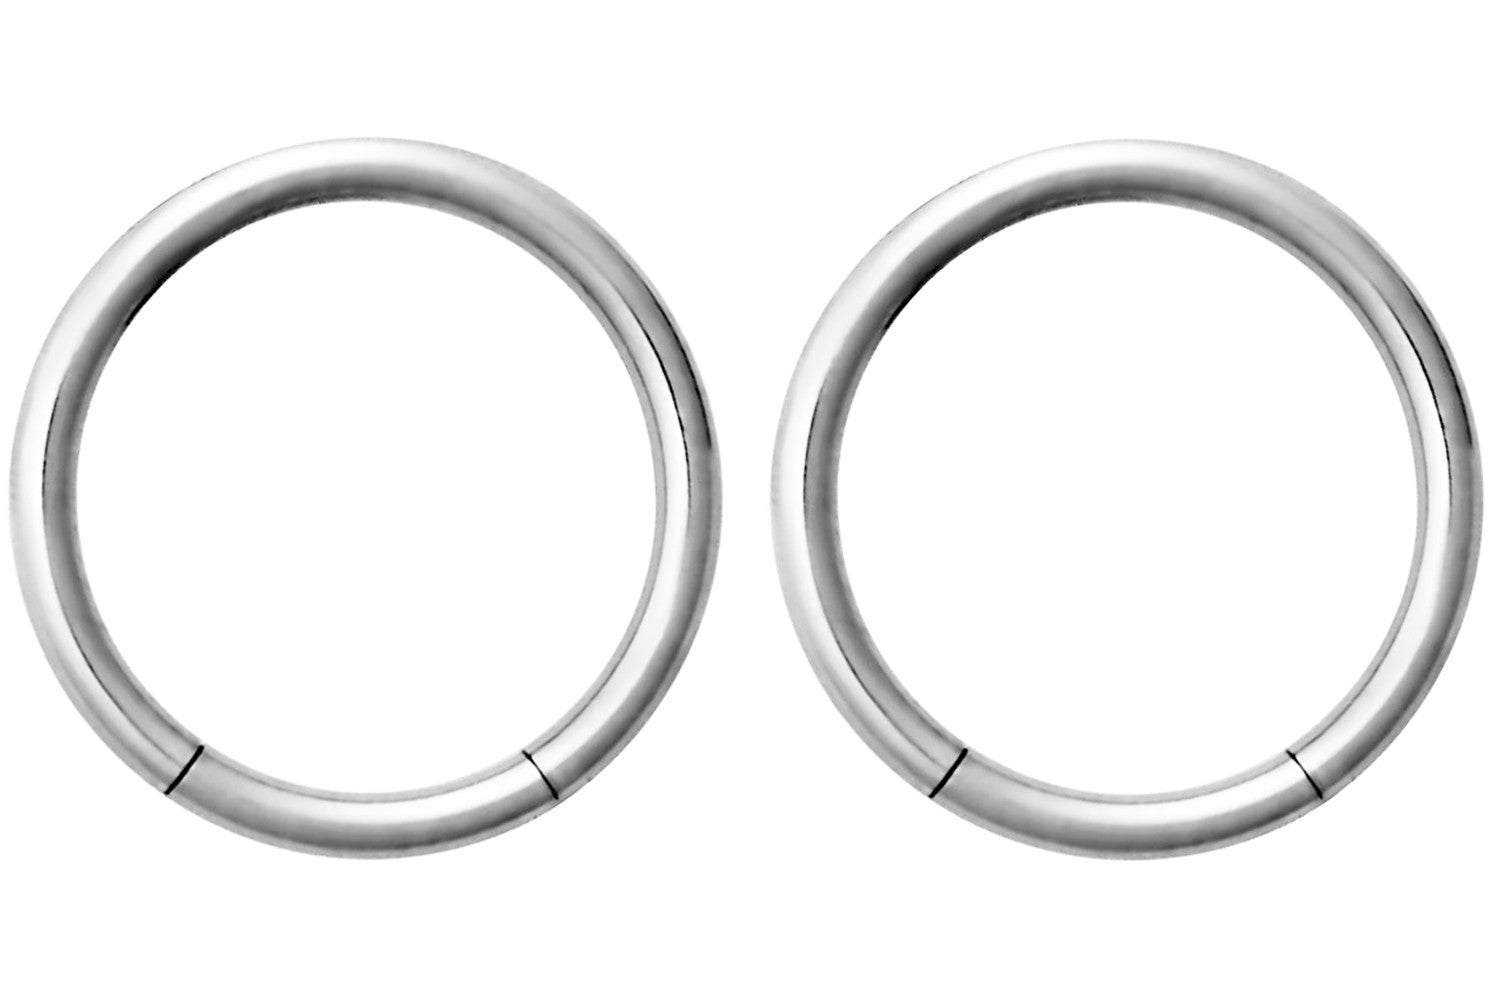 These 16 gauge segment hoop rings are hypoallergenic and nickel free. They can be worn in a variety of 16 gauge body piercings.